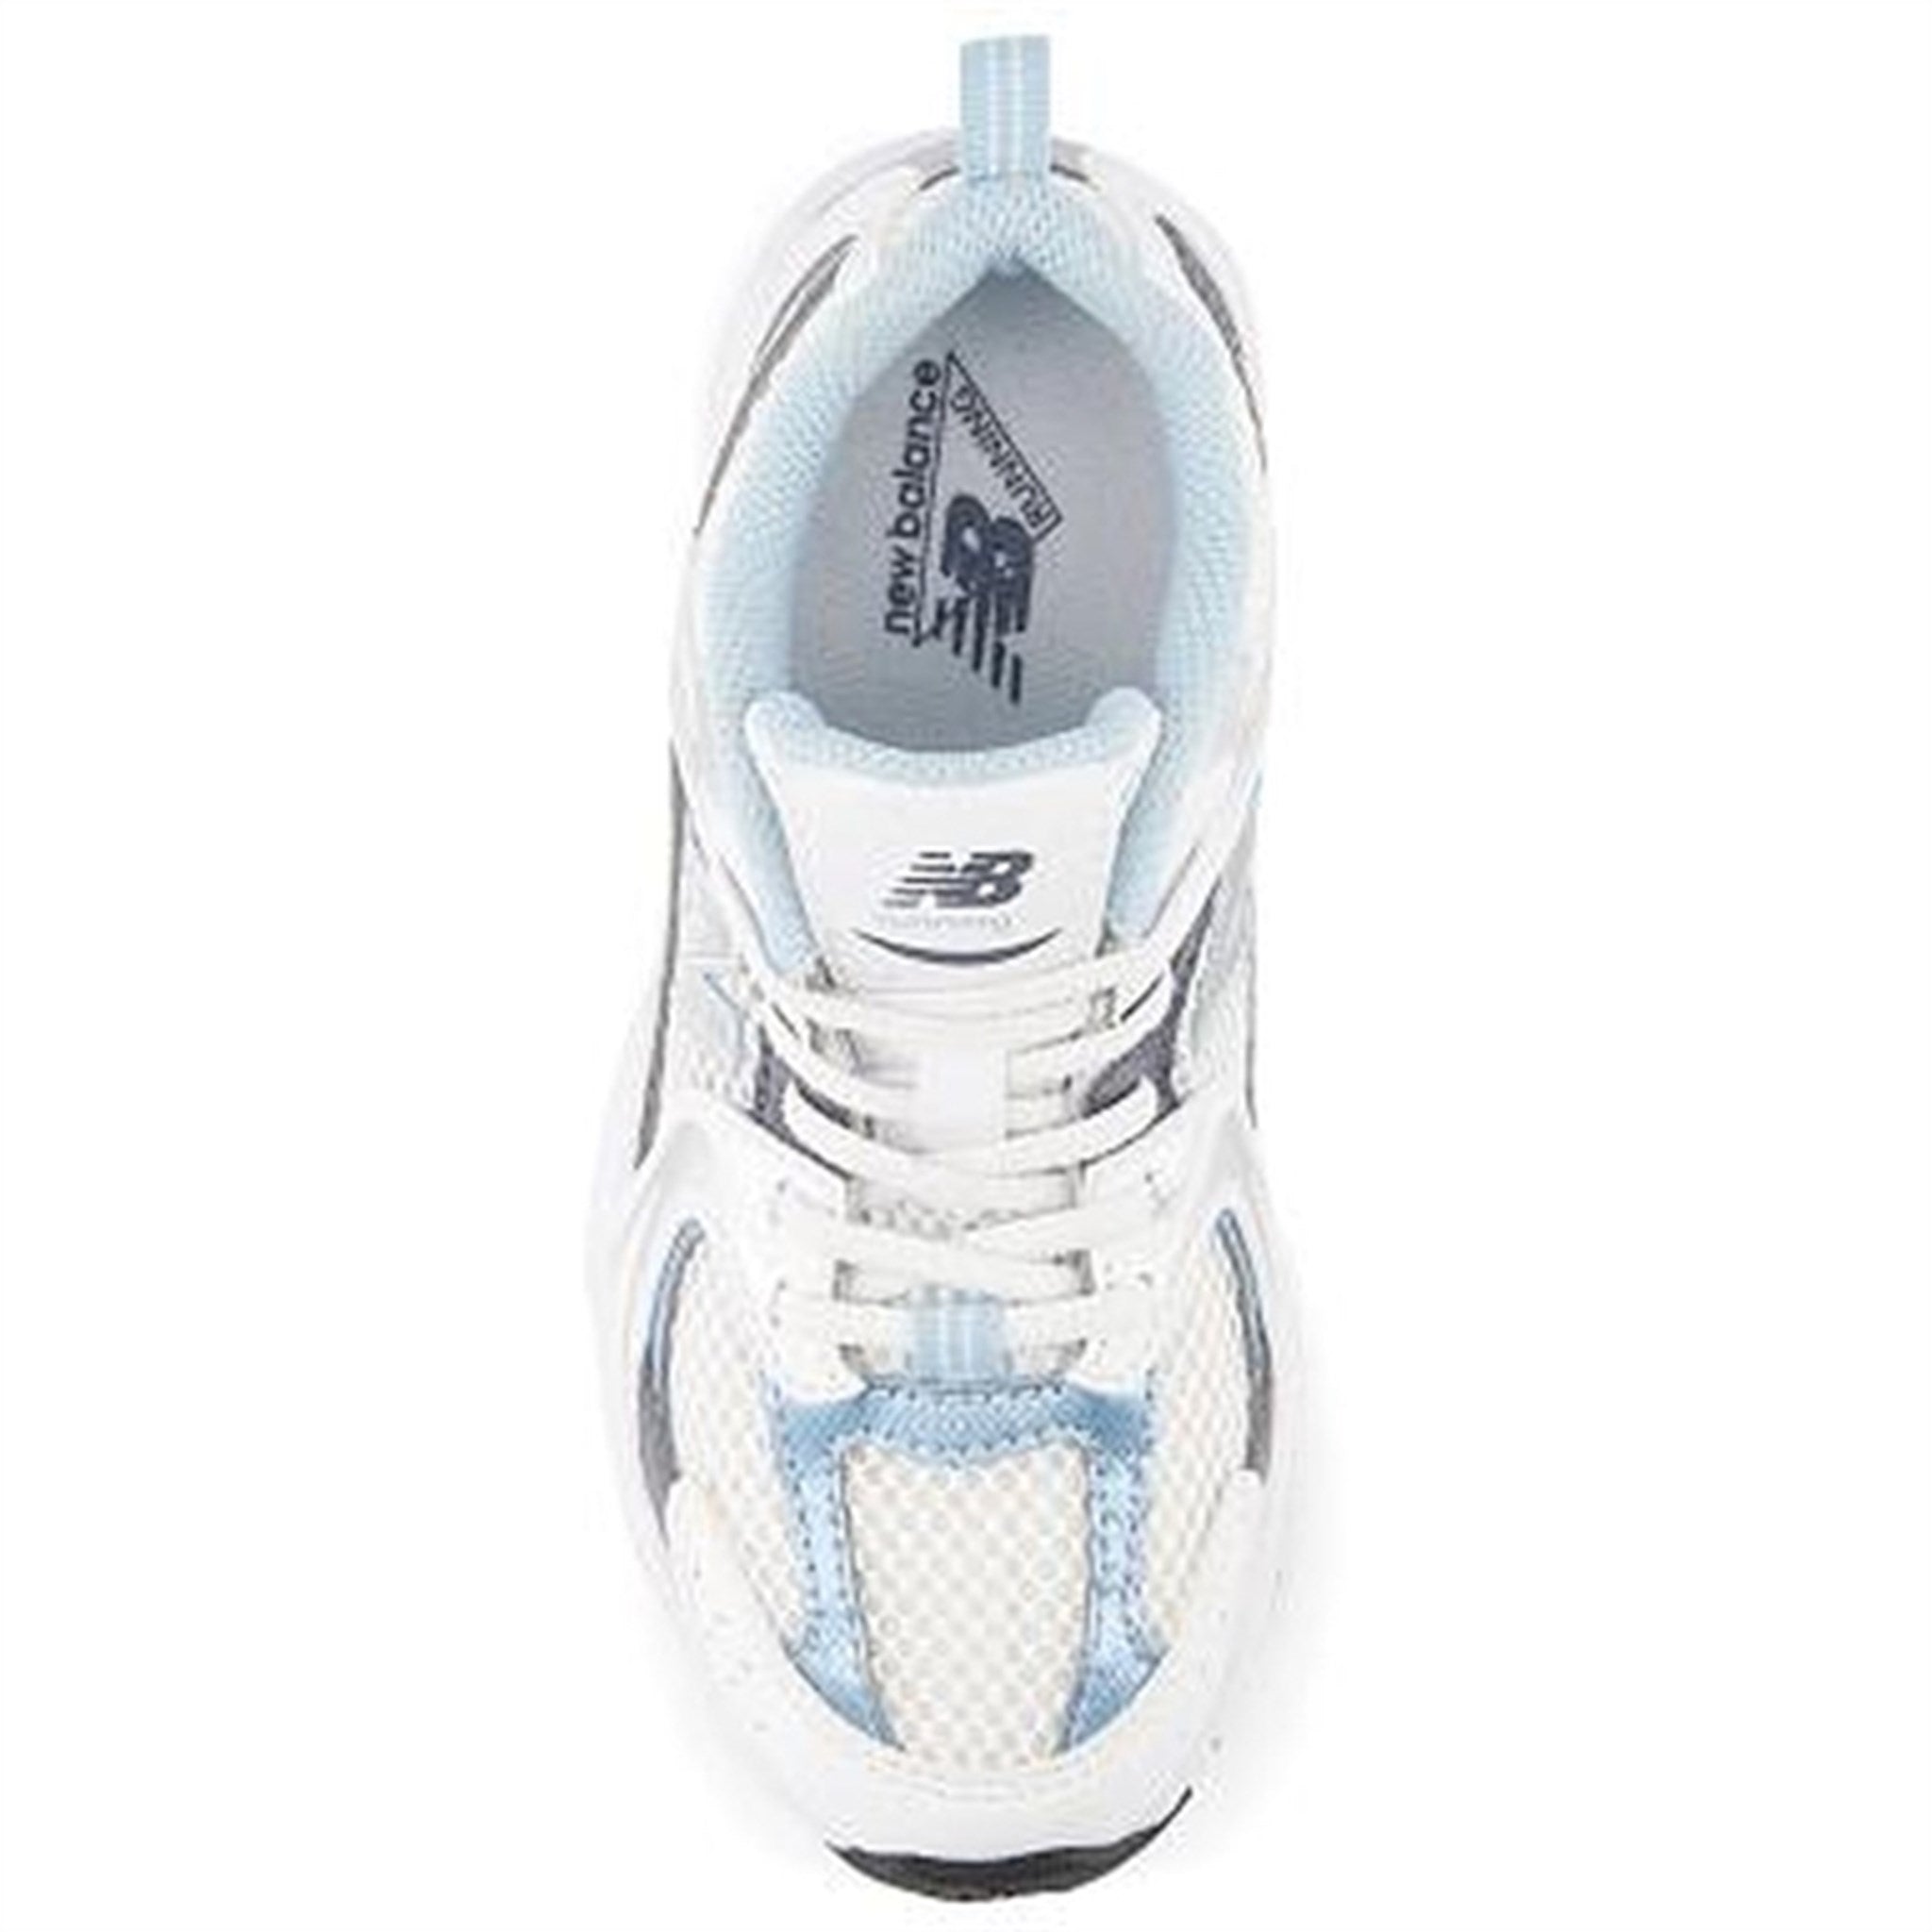 New Balance 530 Kids Bungee Lace Sneakers White 3